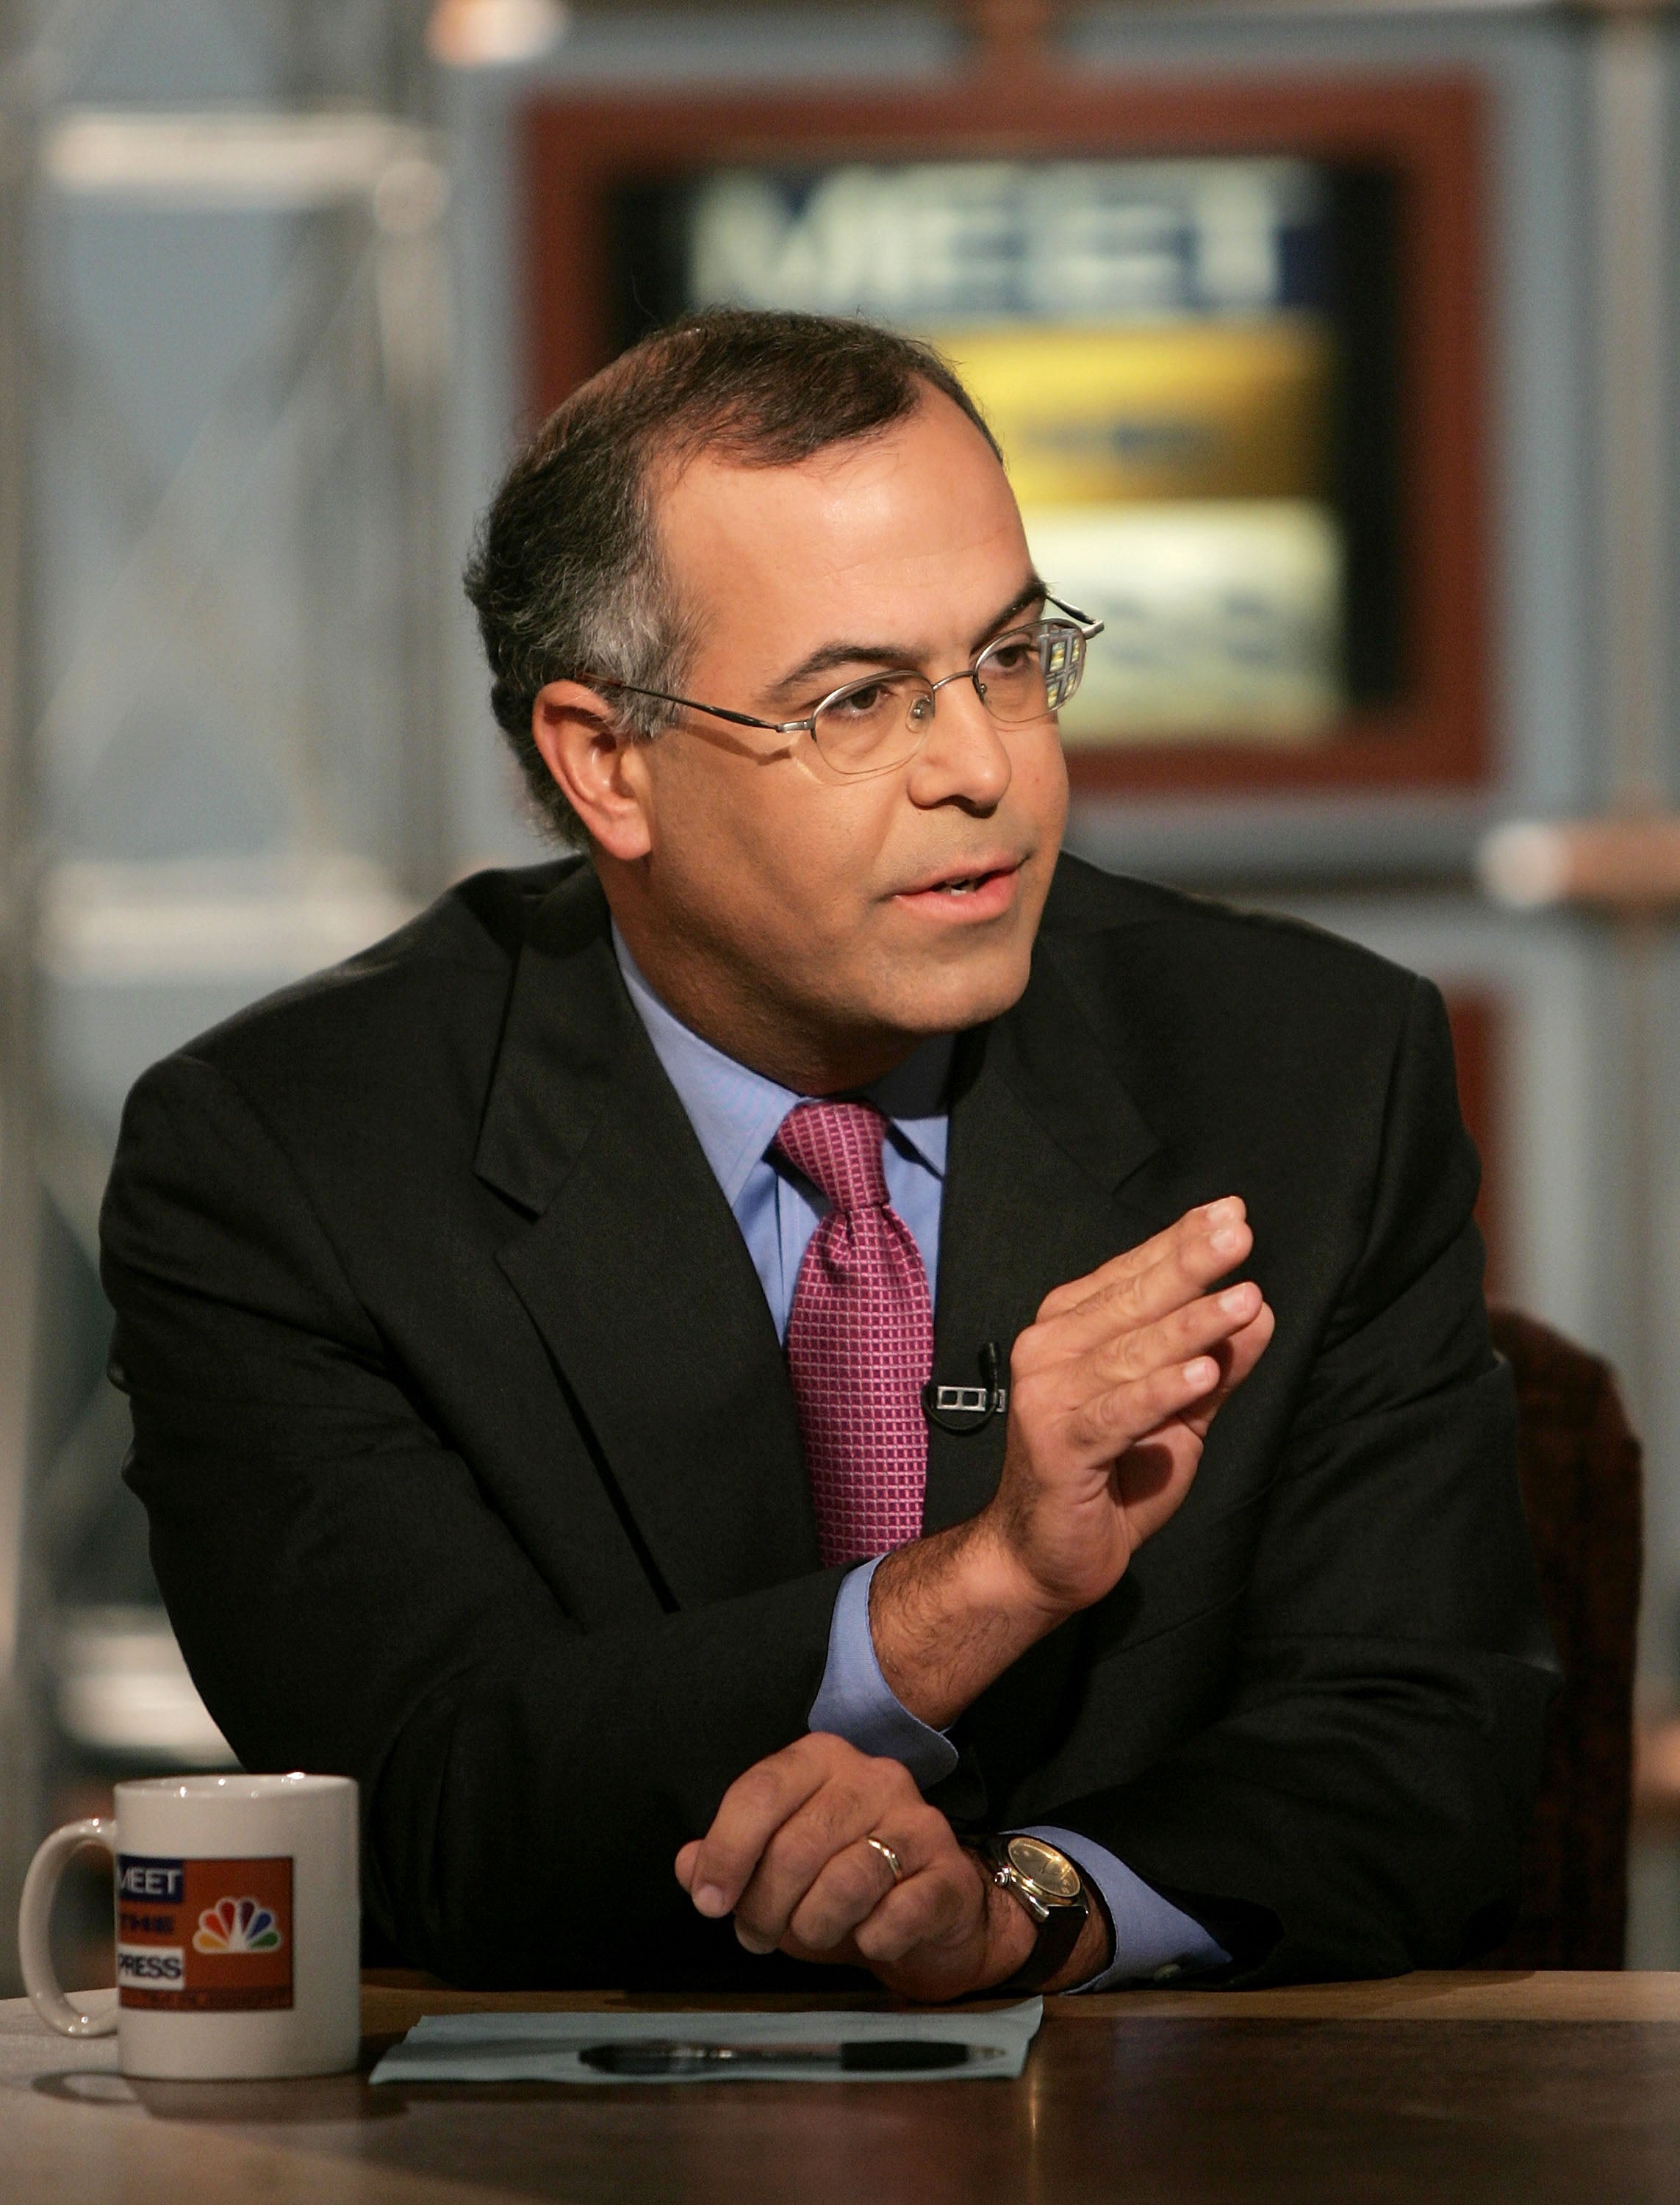 WASHINGTON - SEPTEMBER 25: New York Times columnist, David Brooks, gestures while speaking on NBC's "Meet the Press" during a taping at the NBC studios September 25, 2005 in Washington, DC.